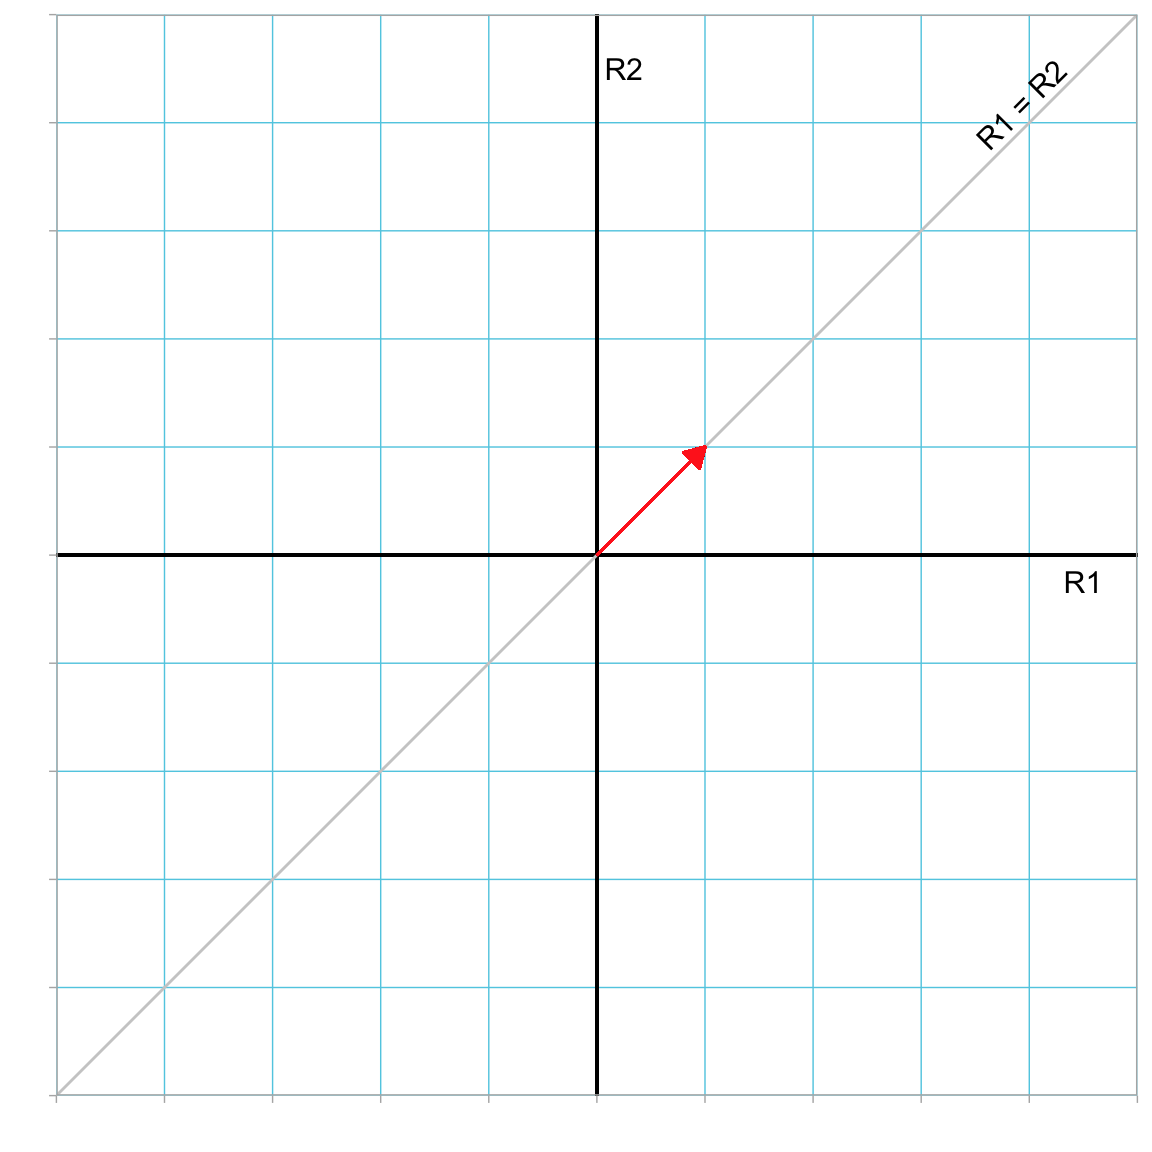 Plot showing the ones vector (in red) in the R1--R2 dimensional space. The $R1=R2$ line is also displayed. 